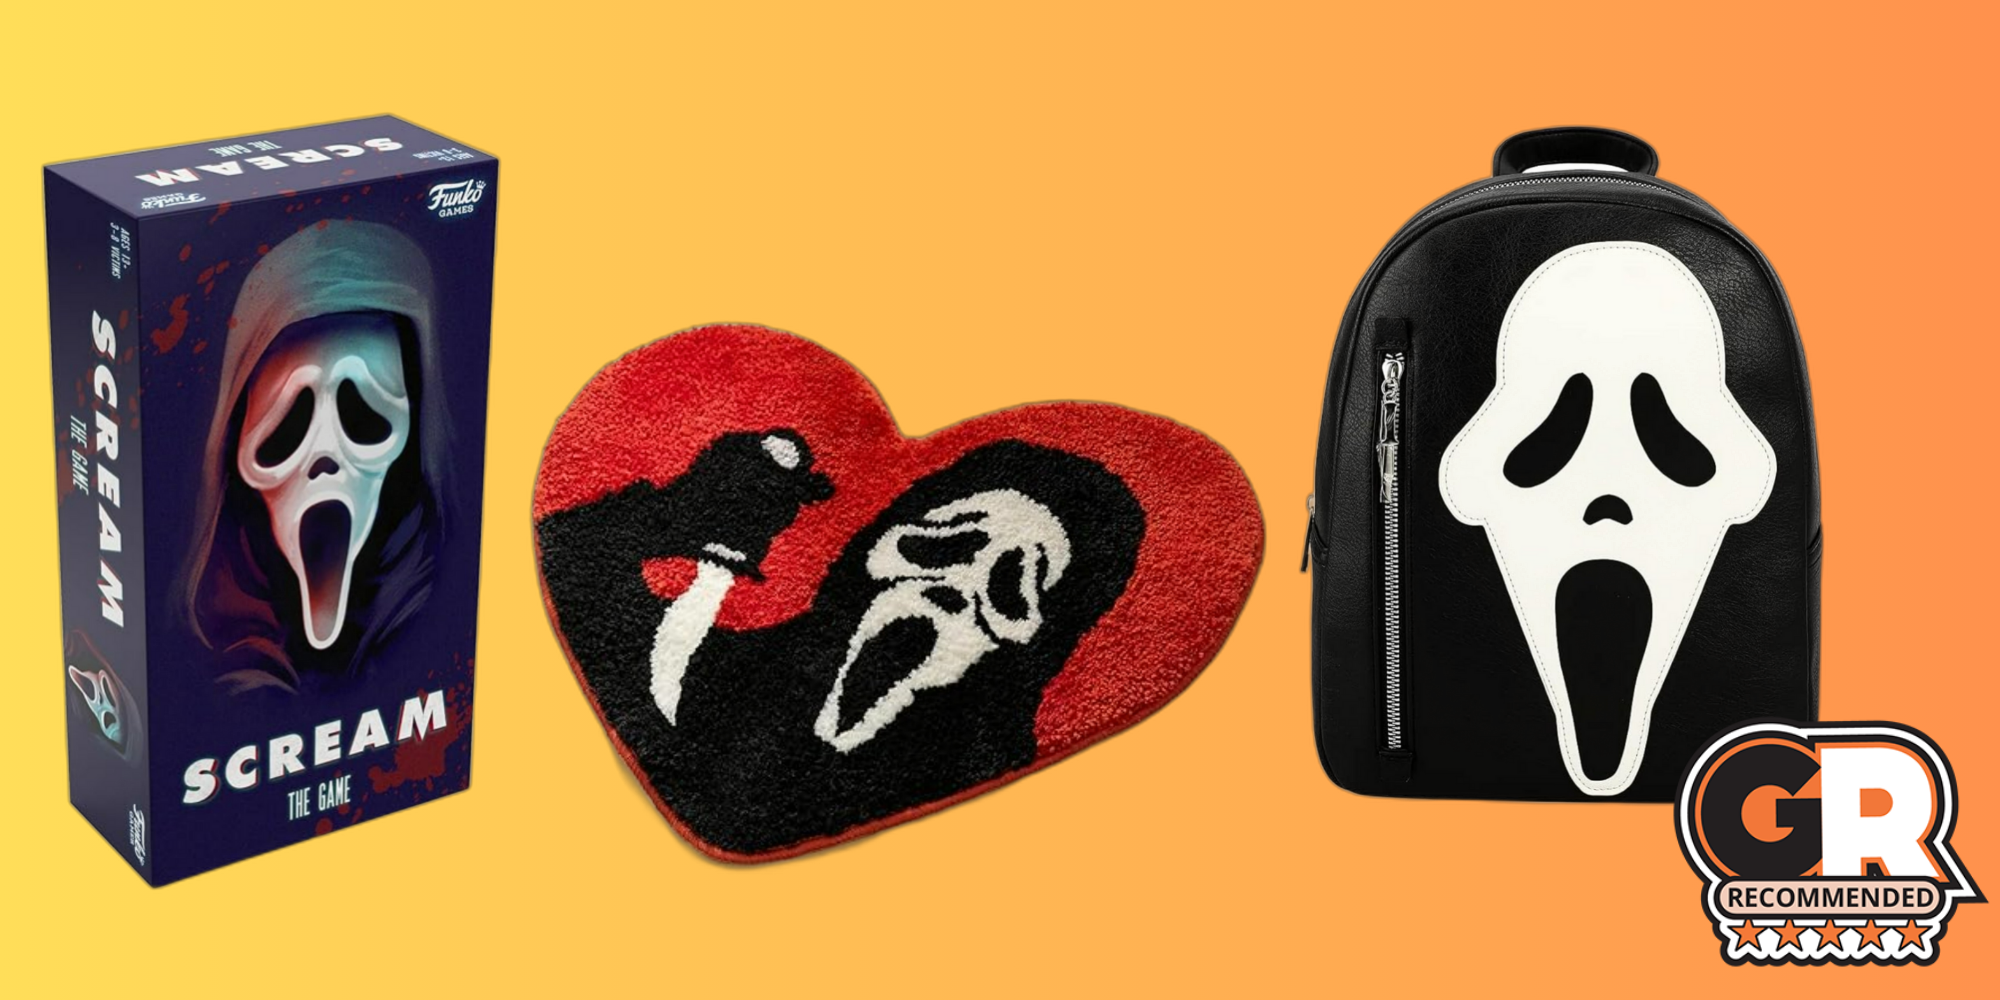 The Best Scream Merch In 2023 - Ghostface Figures, Collectibles, & More